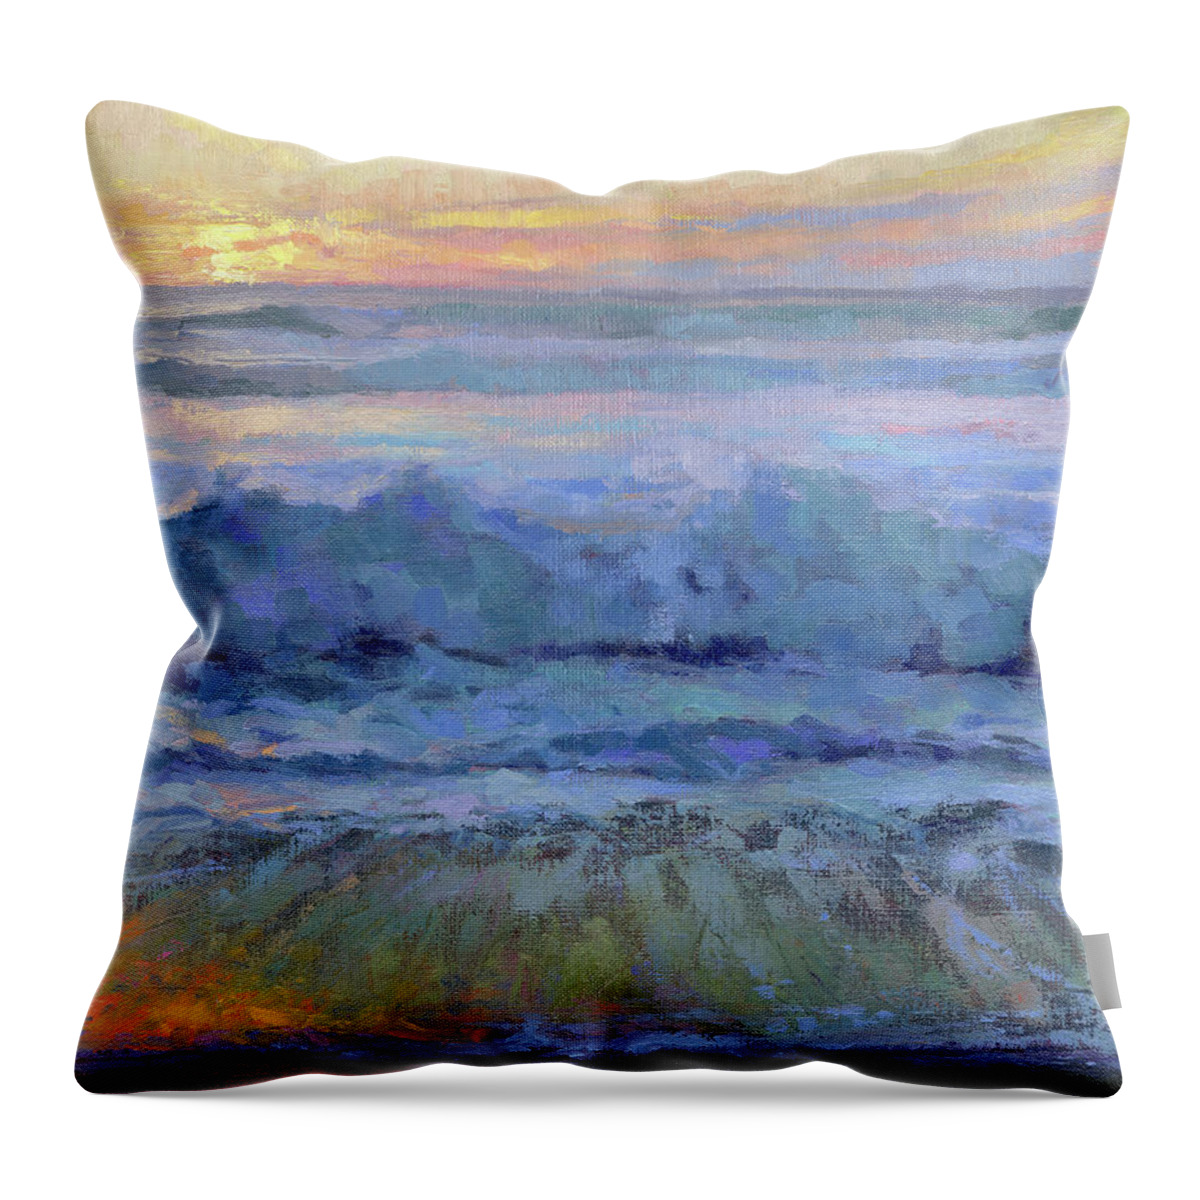 Ocean Throw Pillow featuring the painting Twilight Surf by Steve Henderson